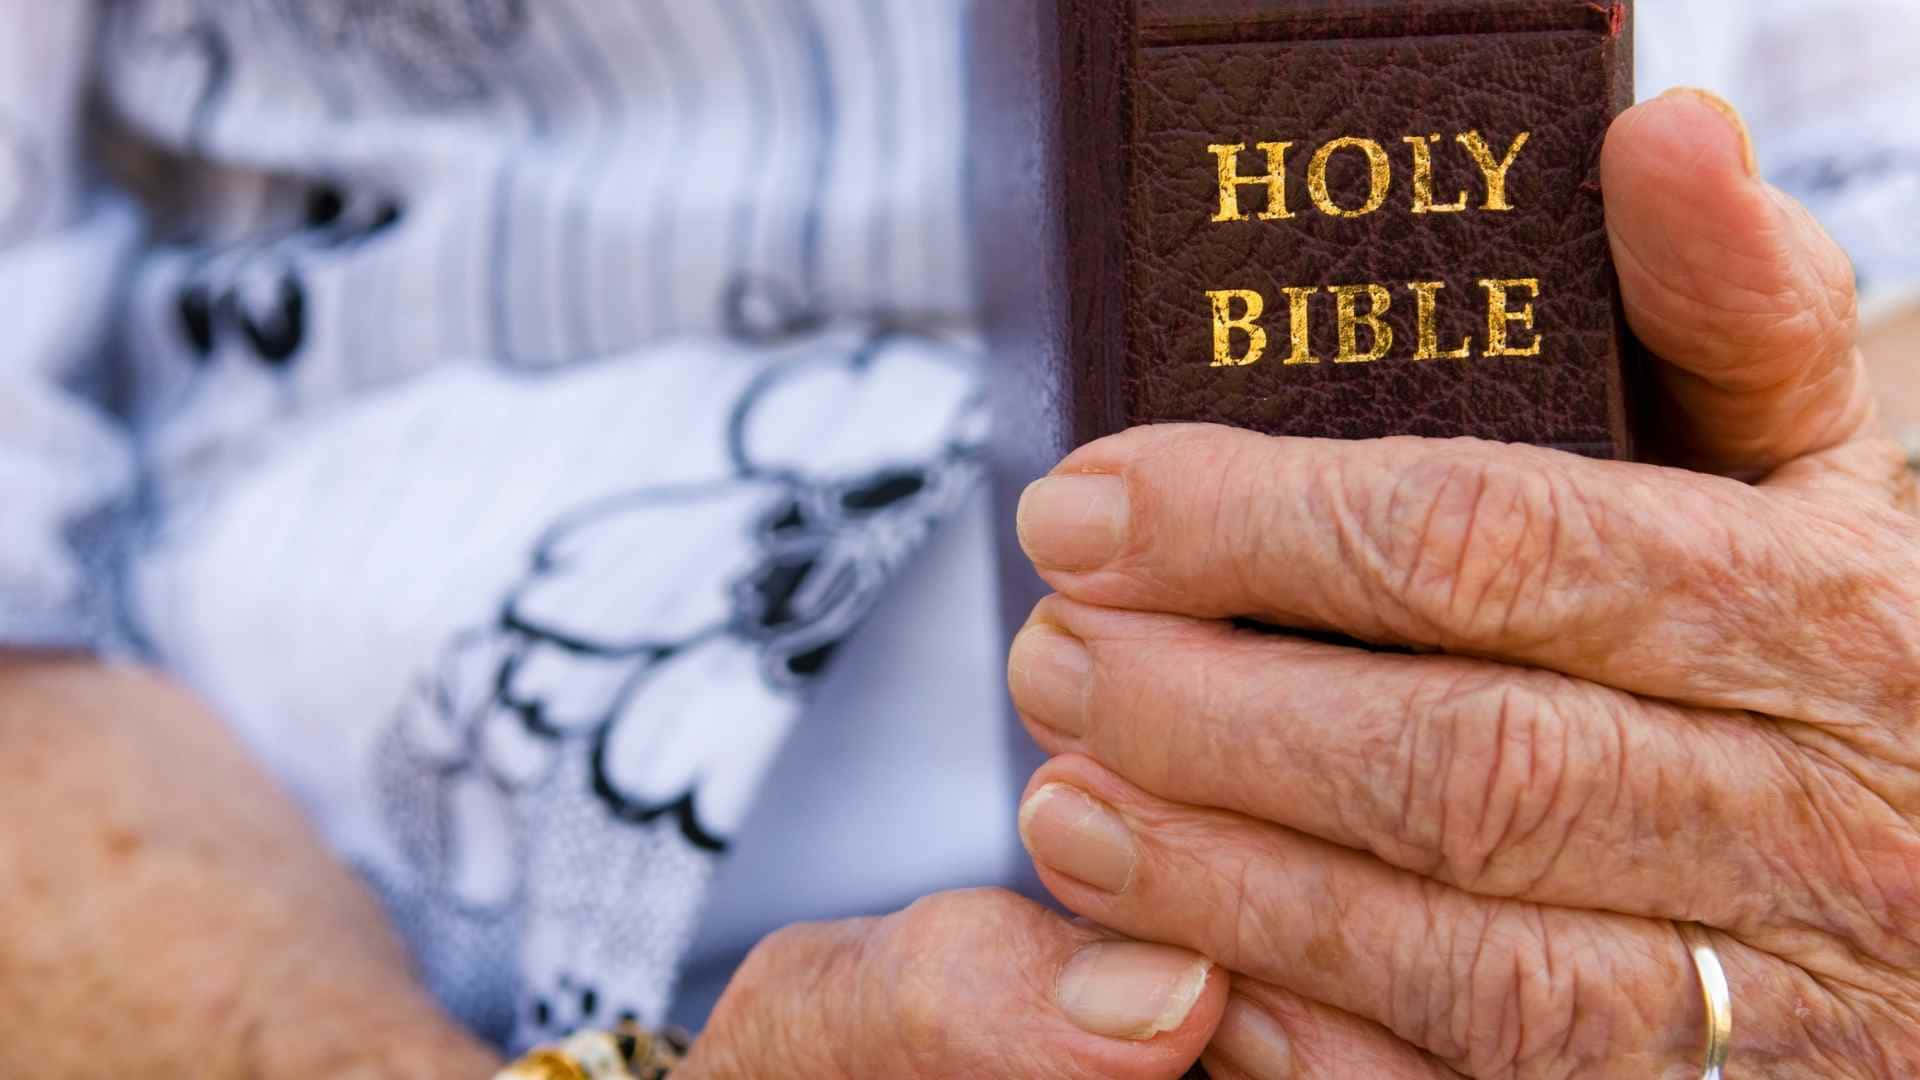 A Woman's Hands Holding A Holy Bible